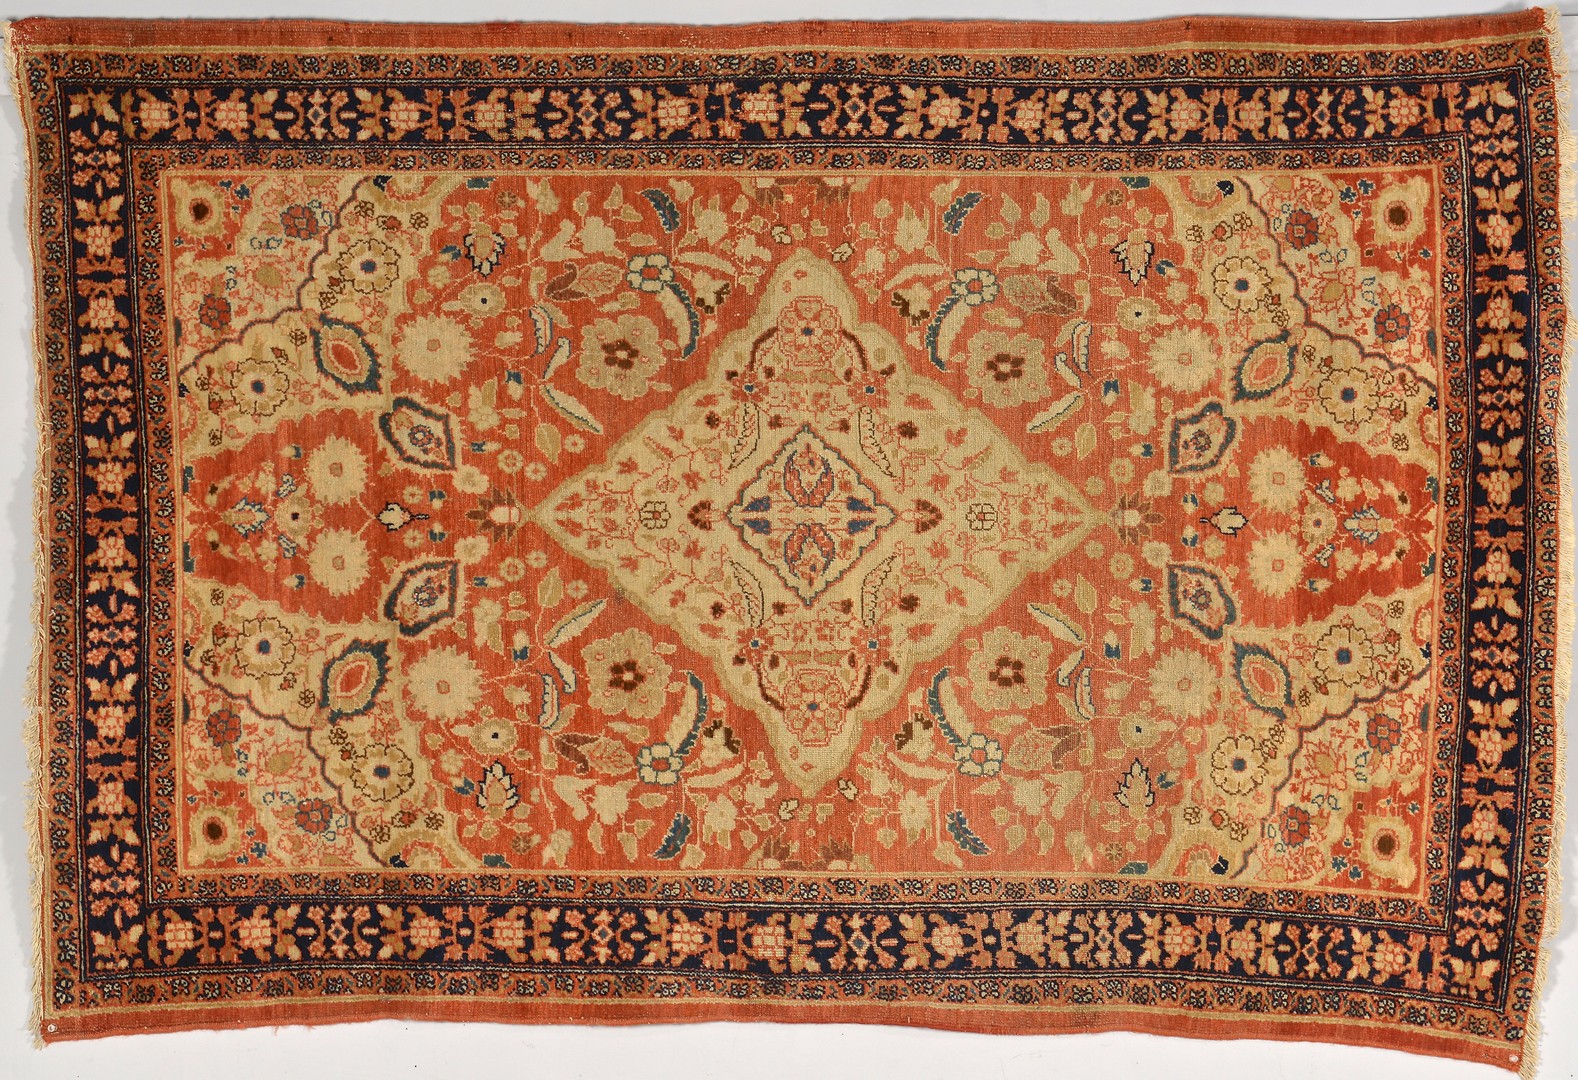 Lot 244: Mission Malayer rug, late 19th c.